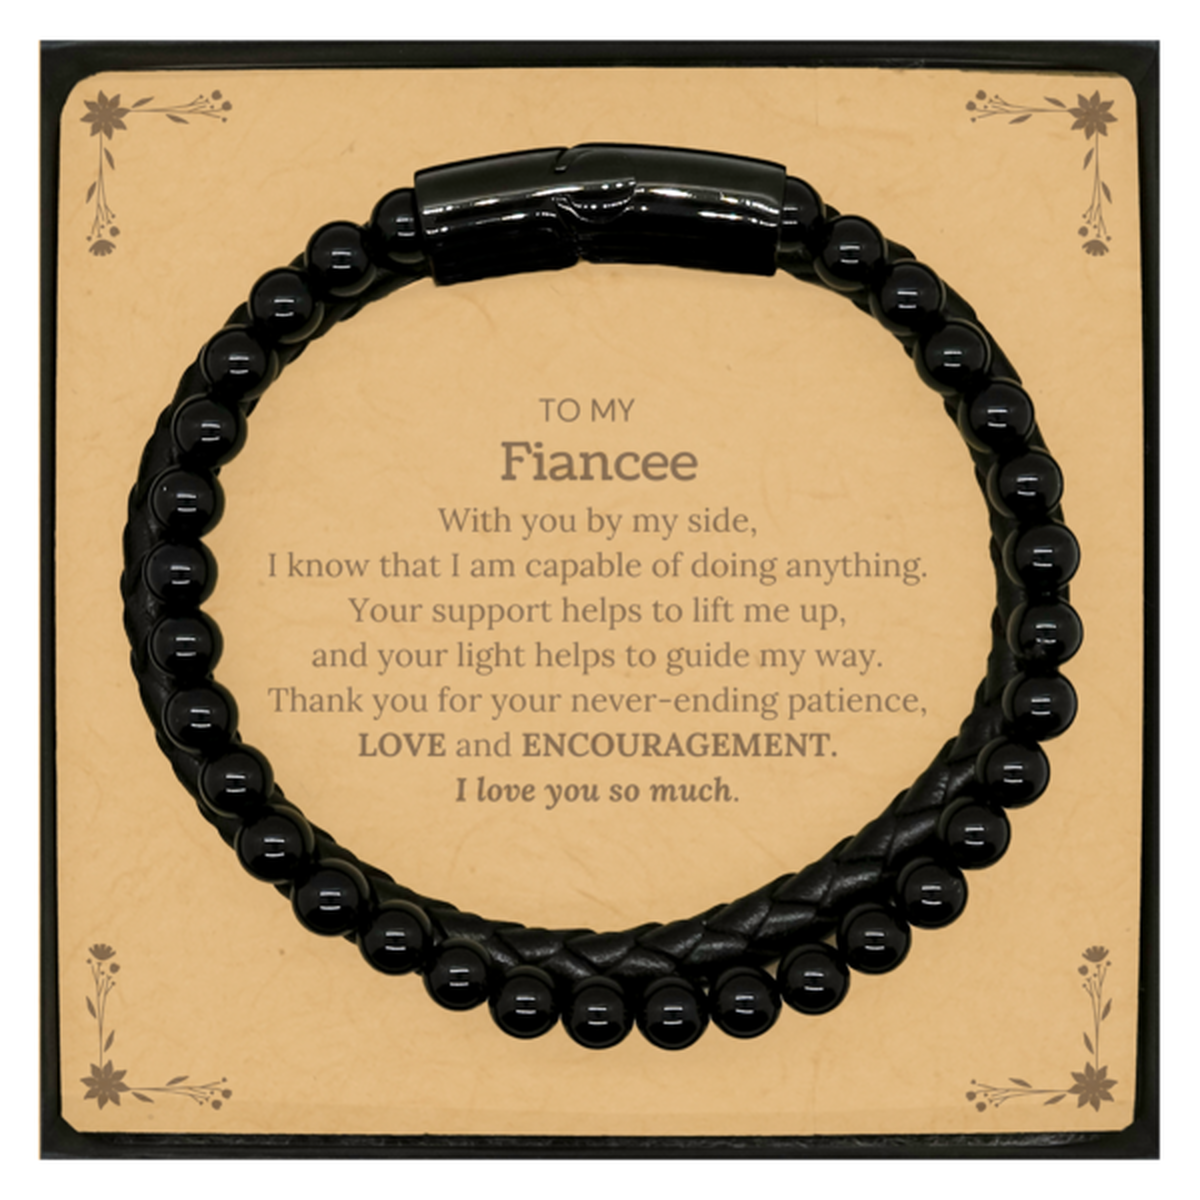 Appreciation Fiancee Stone Leather Bracelets Gifts, To My Fiancee Birthday Christmas Wedding Keepsake Gifts for Fiancee With you by my side, I know that I am capable of doing anything. I love you so much